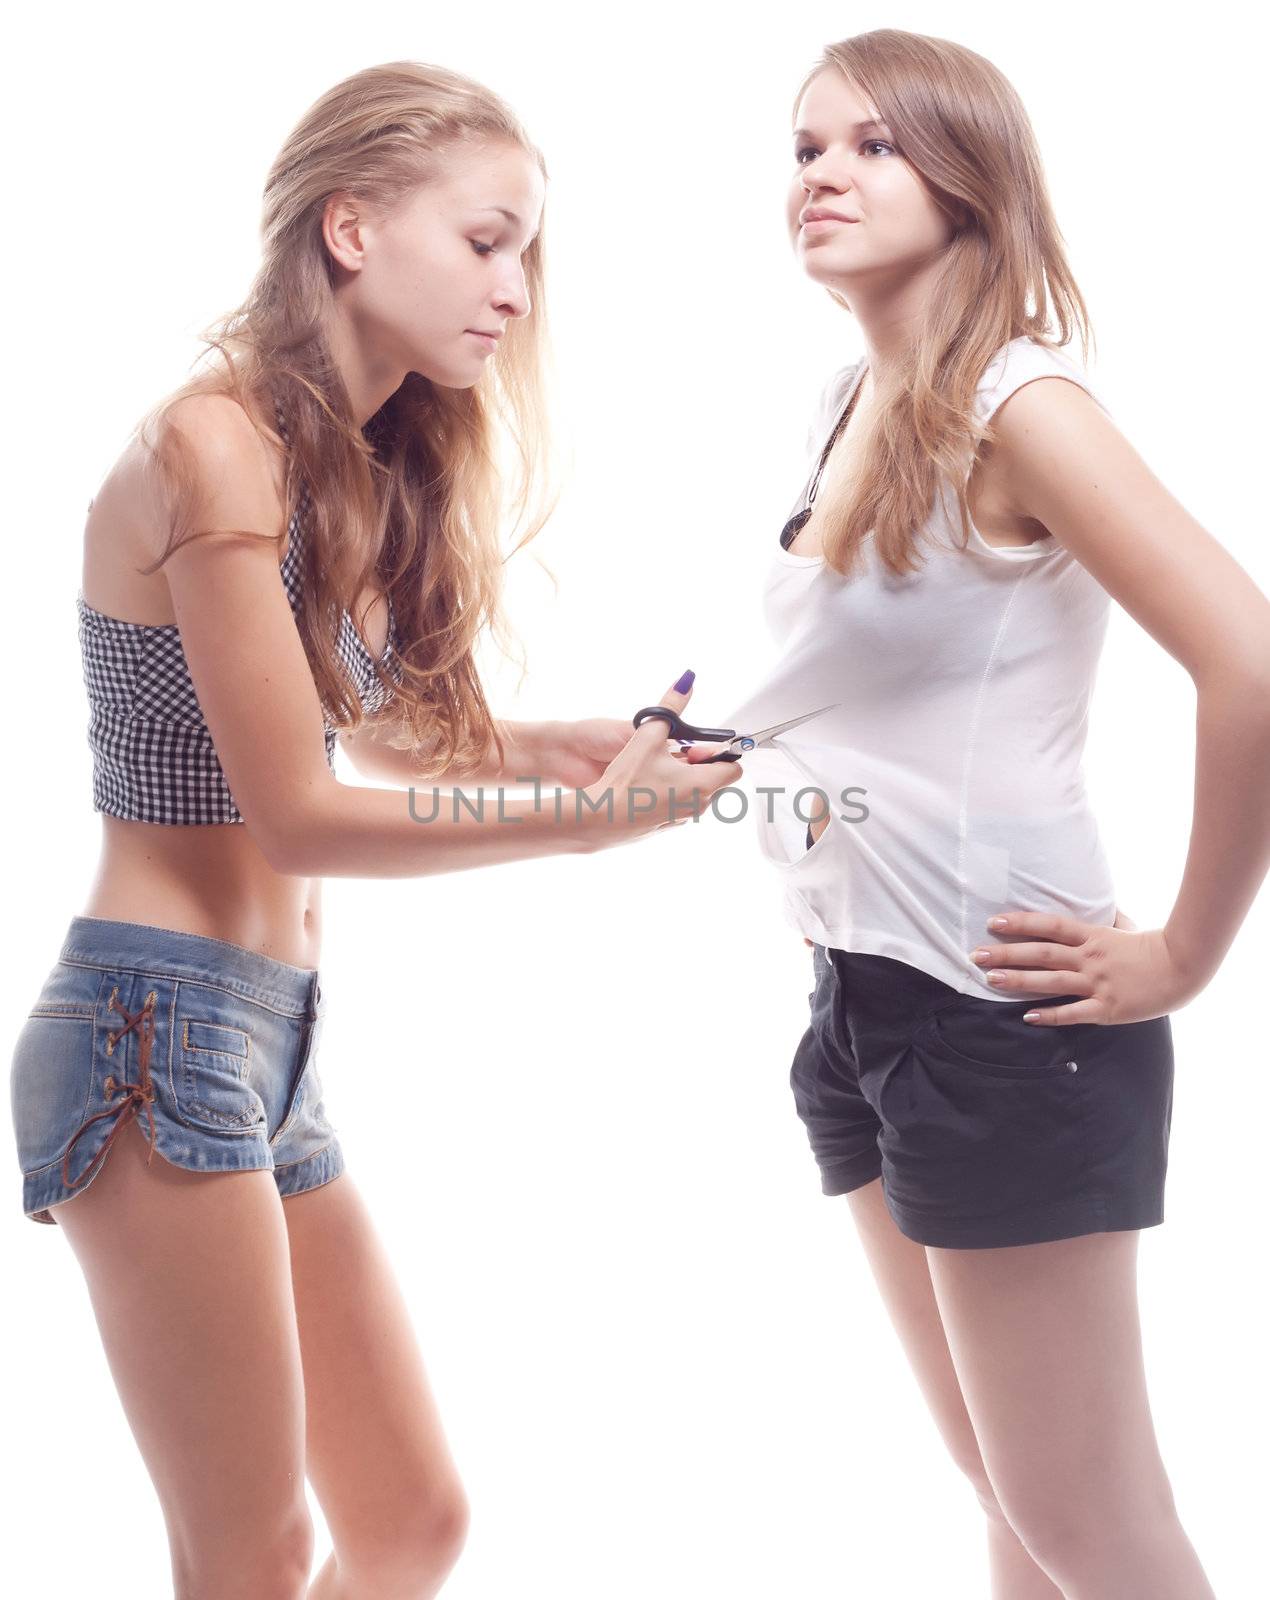 The girl cut shirt on another girl studio photography